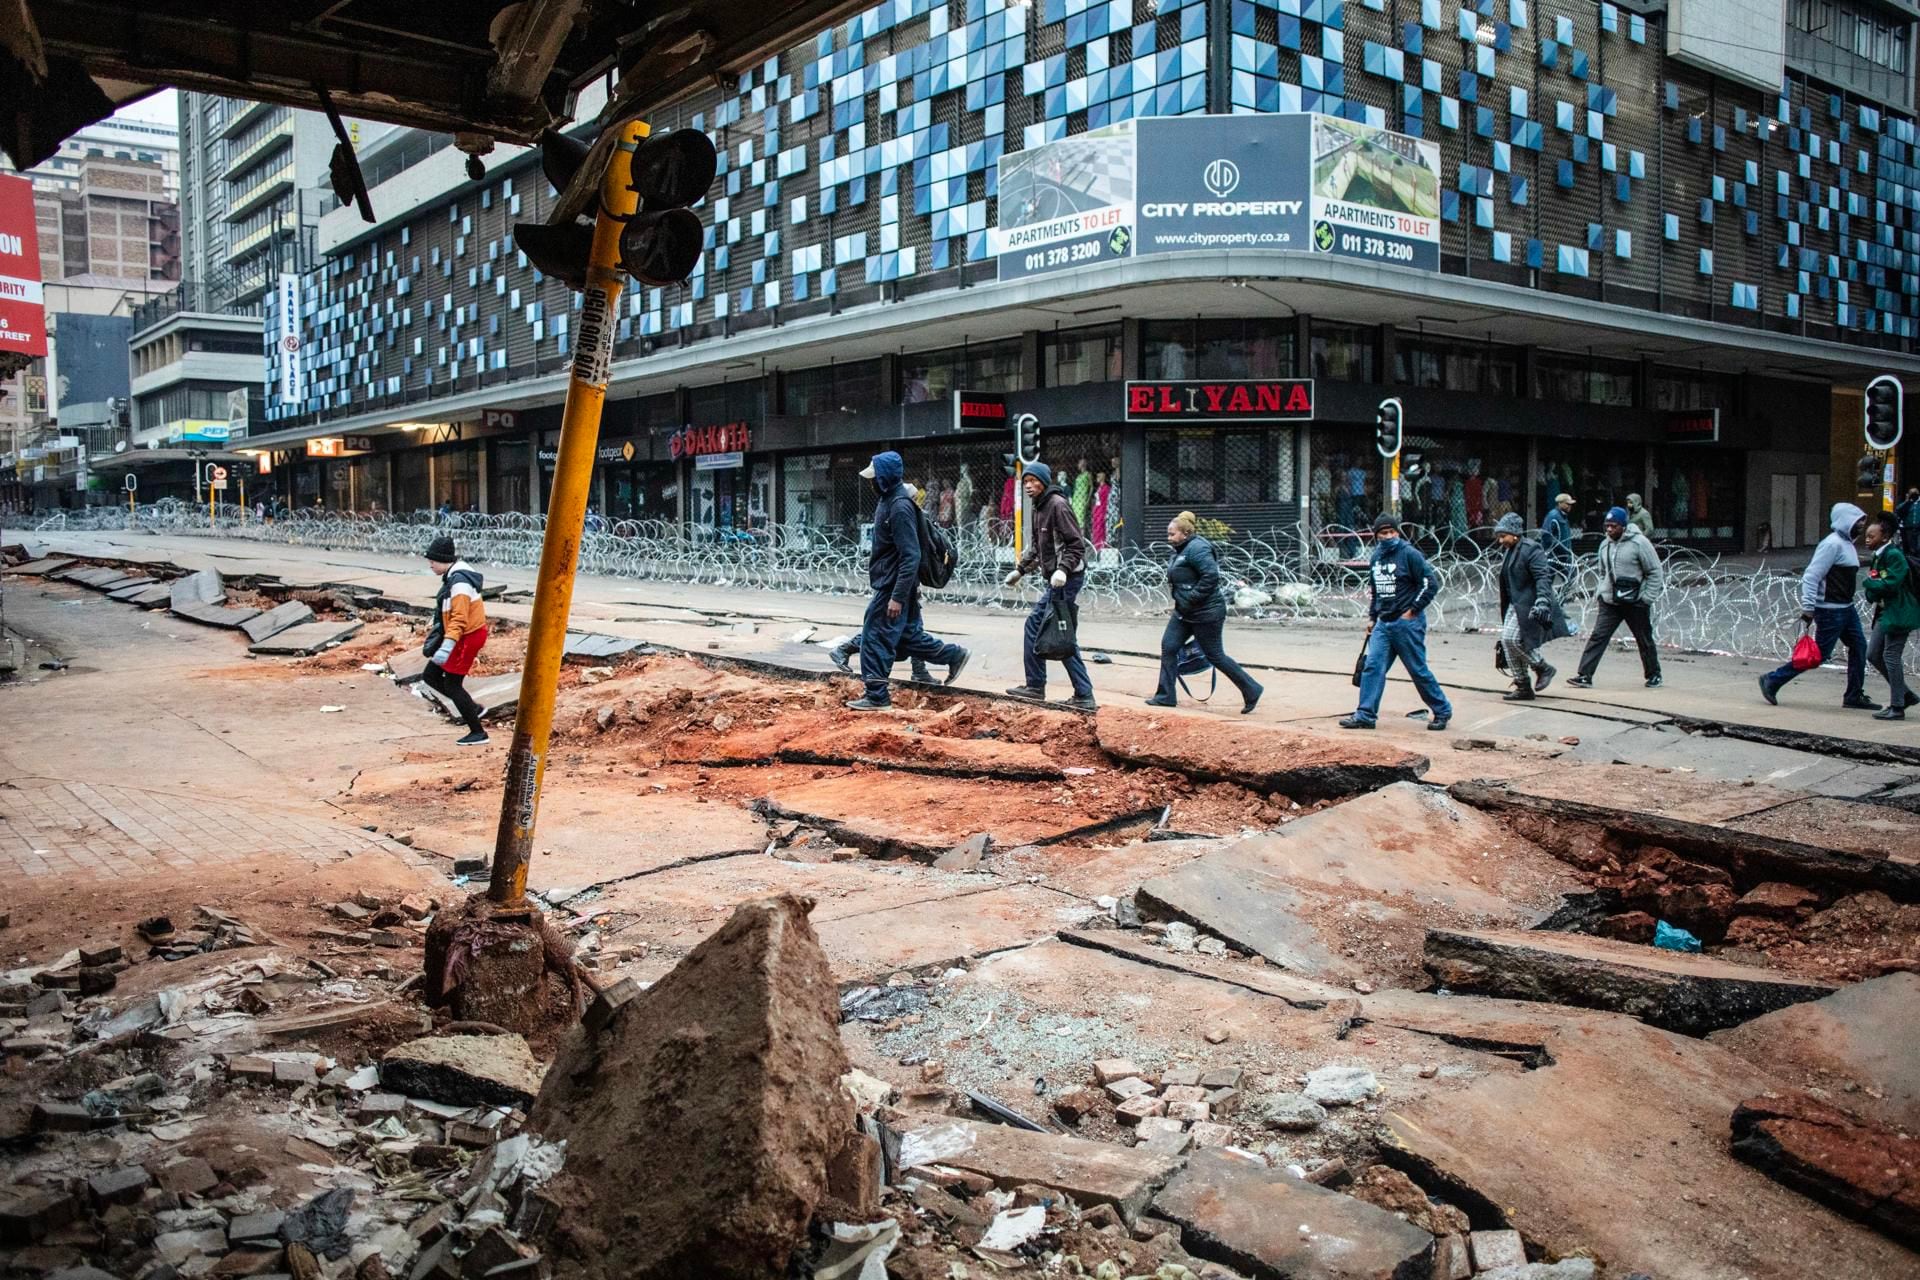 Johannesburg (South Africa), 21/07/2023.- People walk along a damaged street following an underground gas explosion, in Bree Street, downtown Johannesburg, South Africa, 21 July 2023. An underground gas explosion on 19 July killed 1 person and injured at least 48 people. Latest reports indicate that local authorities believe the cause of the Johannesburg CBD explosion was igniting a mixture of gas from methane, natural gas, and a commercial gas line within the storm water system. (tormenta, Sudáfrica, Johannesburgo) EFE/EPA/KIM LUDBROOK
